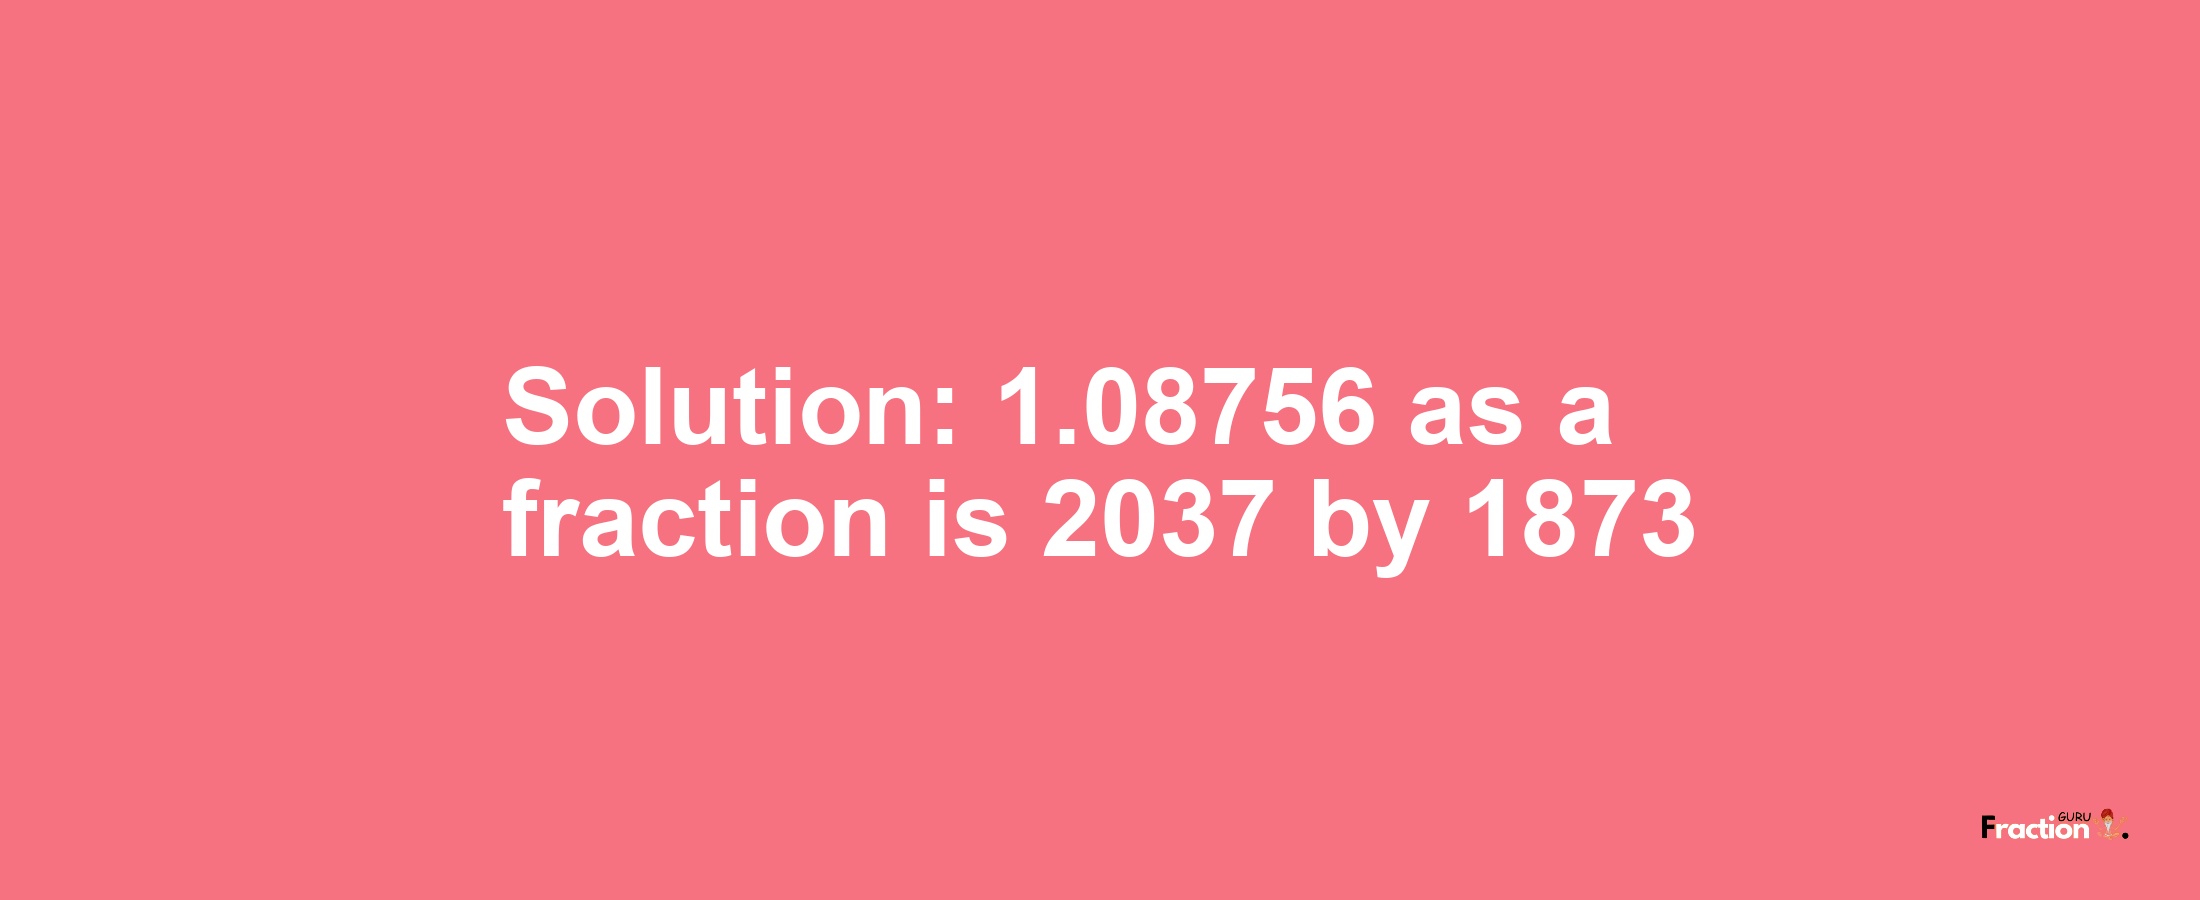 Solution:1.08756 as a fraction is 2037/1873